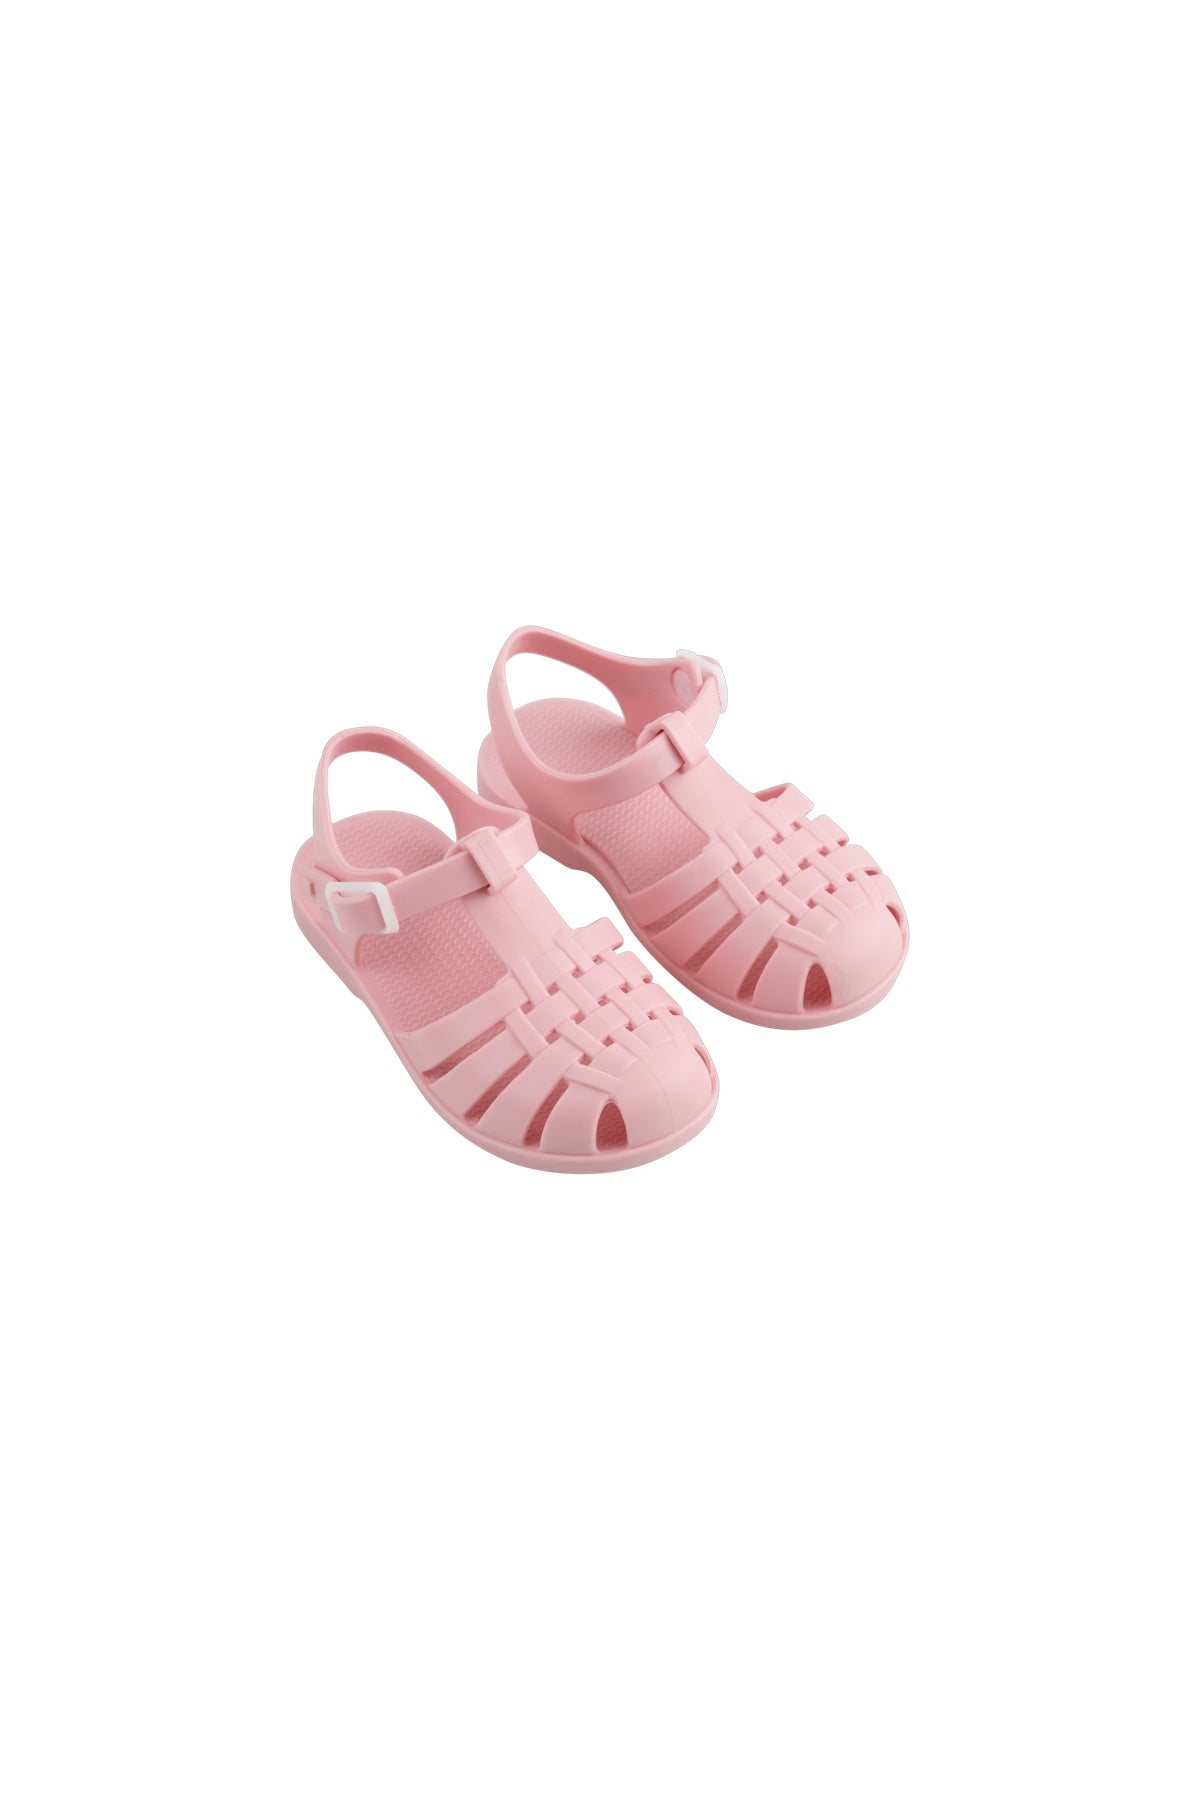 Tinycottons - Jelly Shoes in Blush Pink